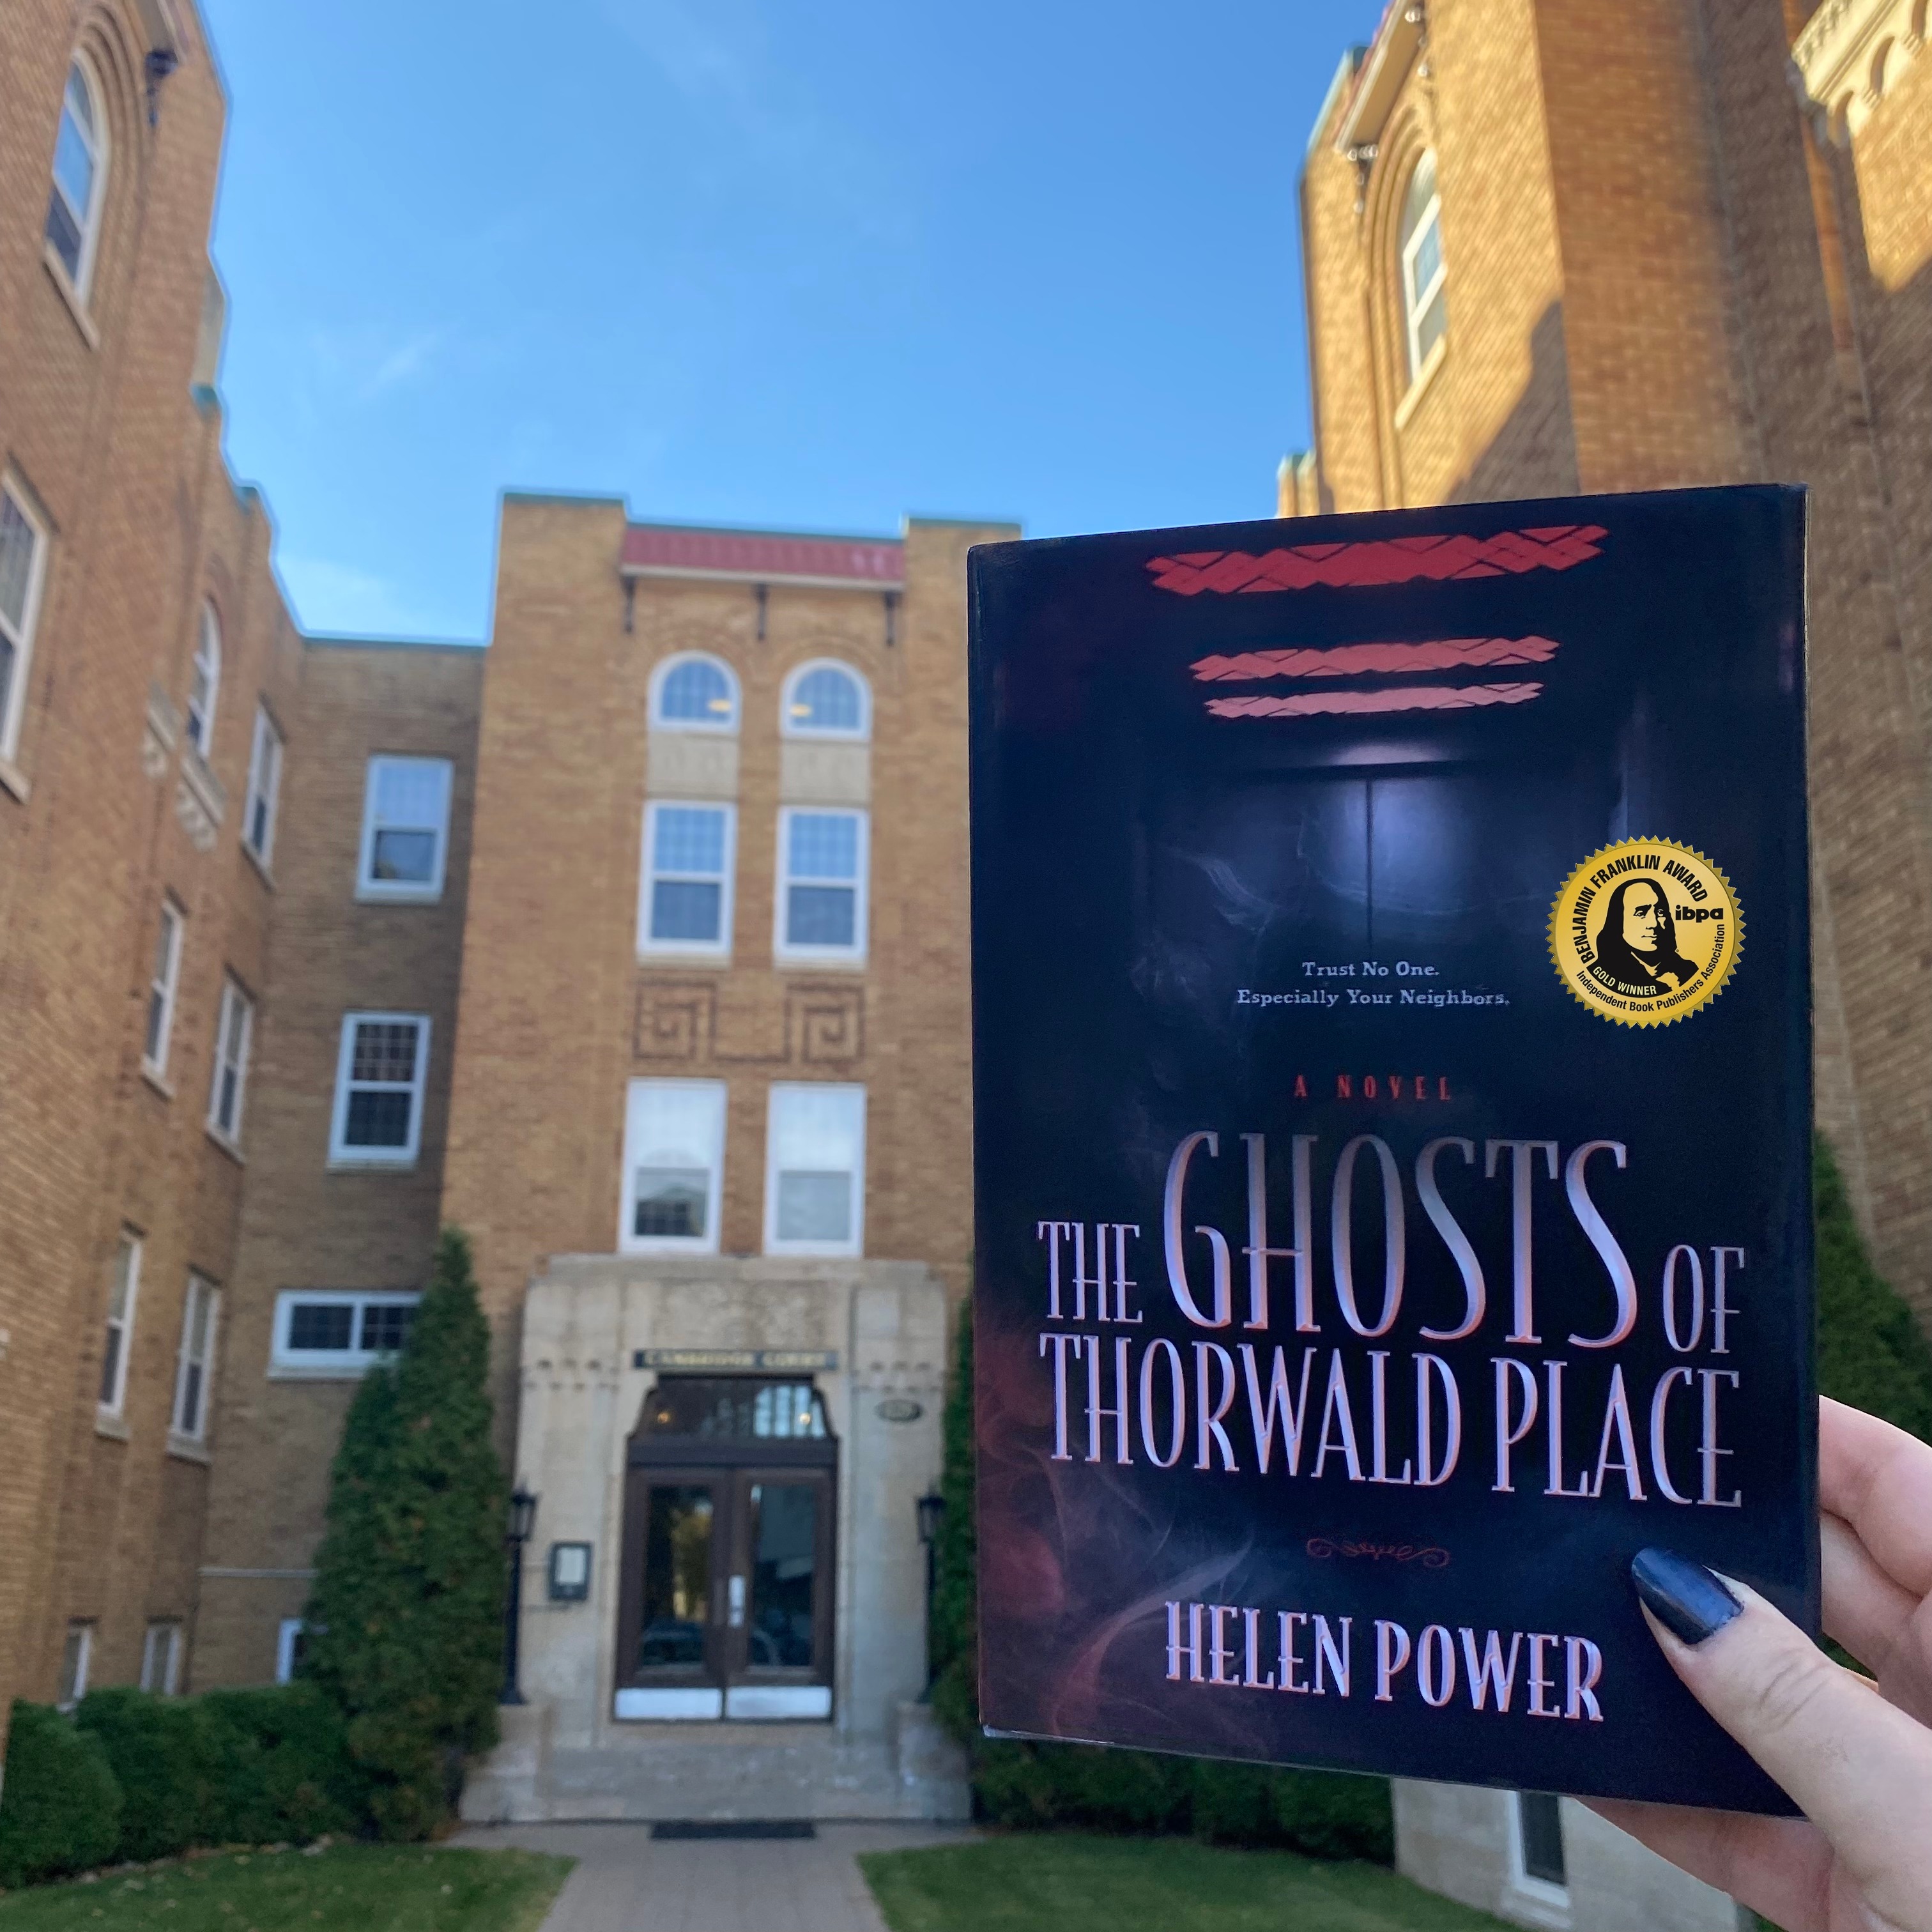 "The Ghosts of Thorwald Place" Wins Gold in IBPA Benjamin Franklin Awards